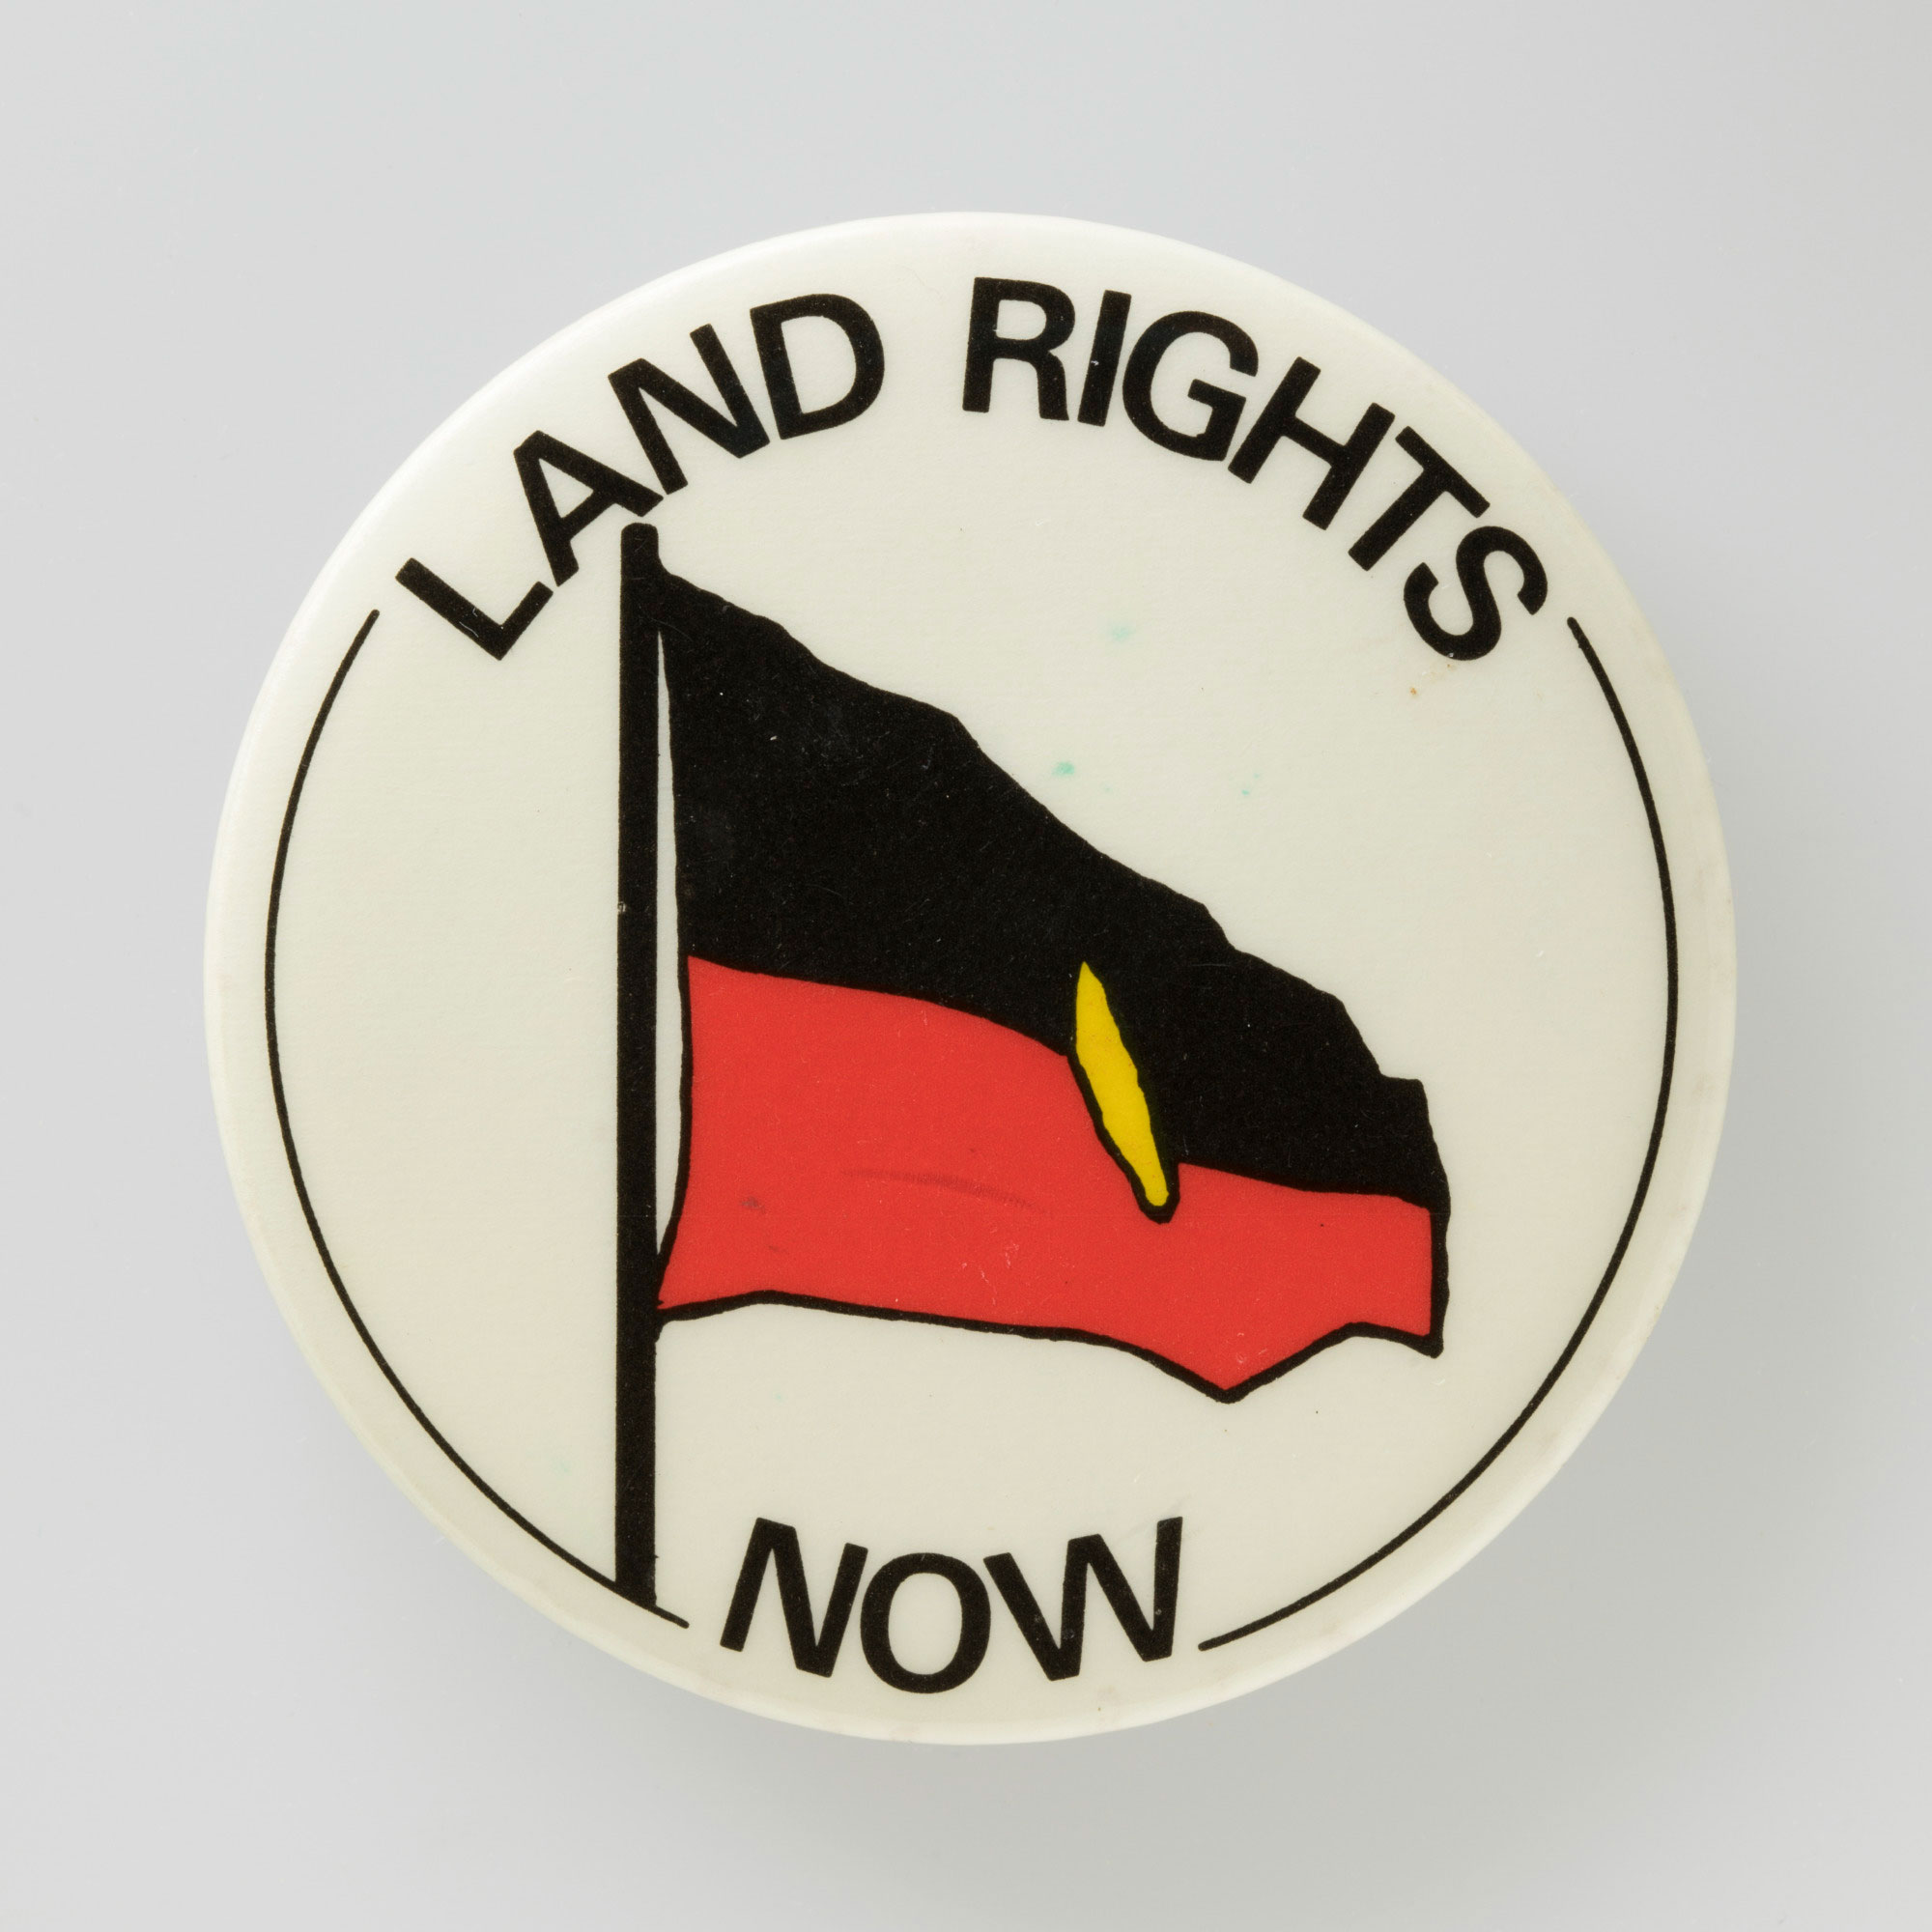 ‘Land Rights Now’ badge.